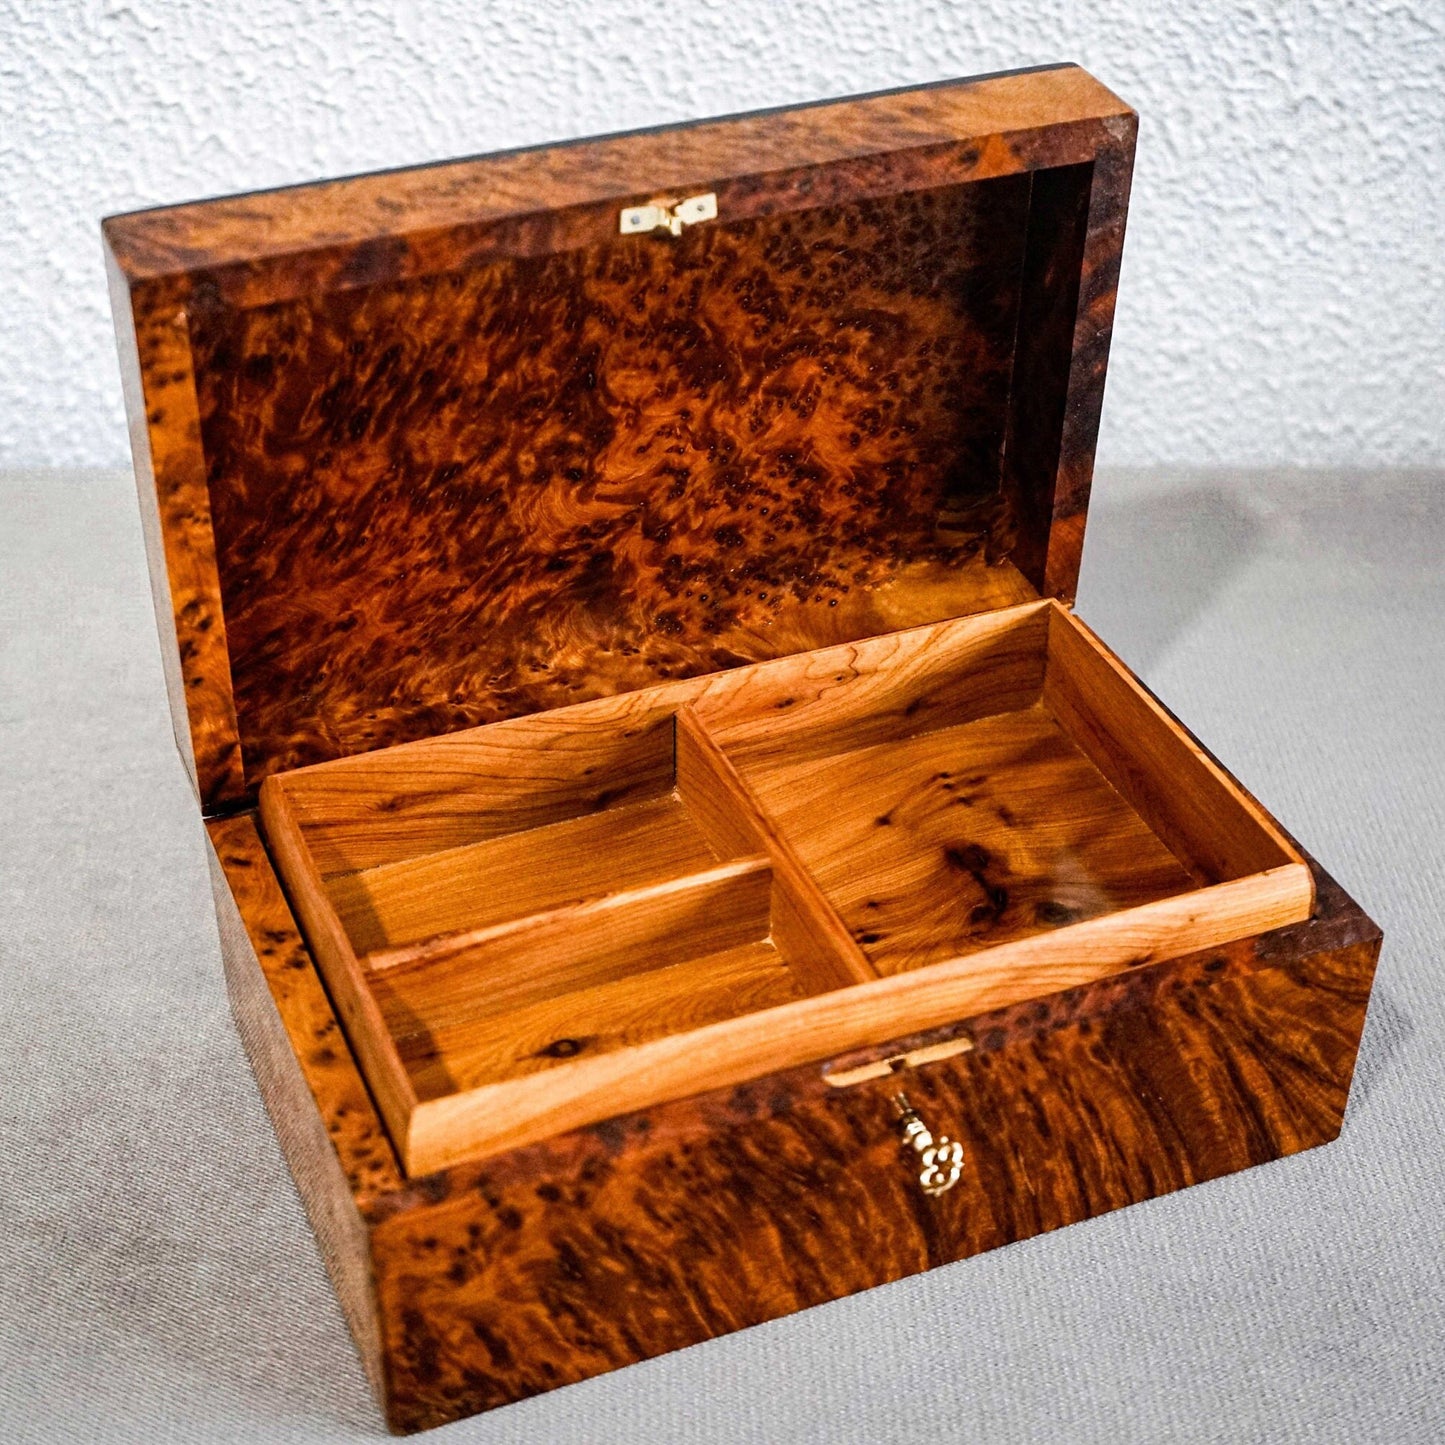 Anniversary gift wooden box with key,couple memory gifts,jewelry customizable box,Engraved name or photo on wood,jewellery storage bird eyes